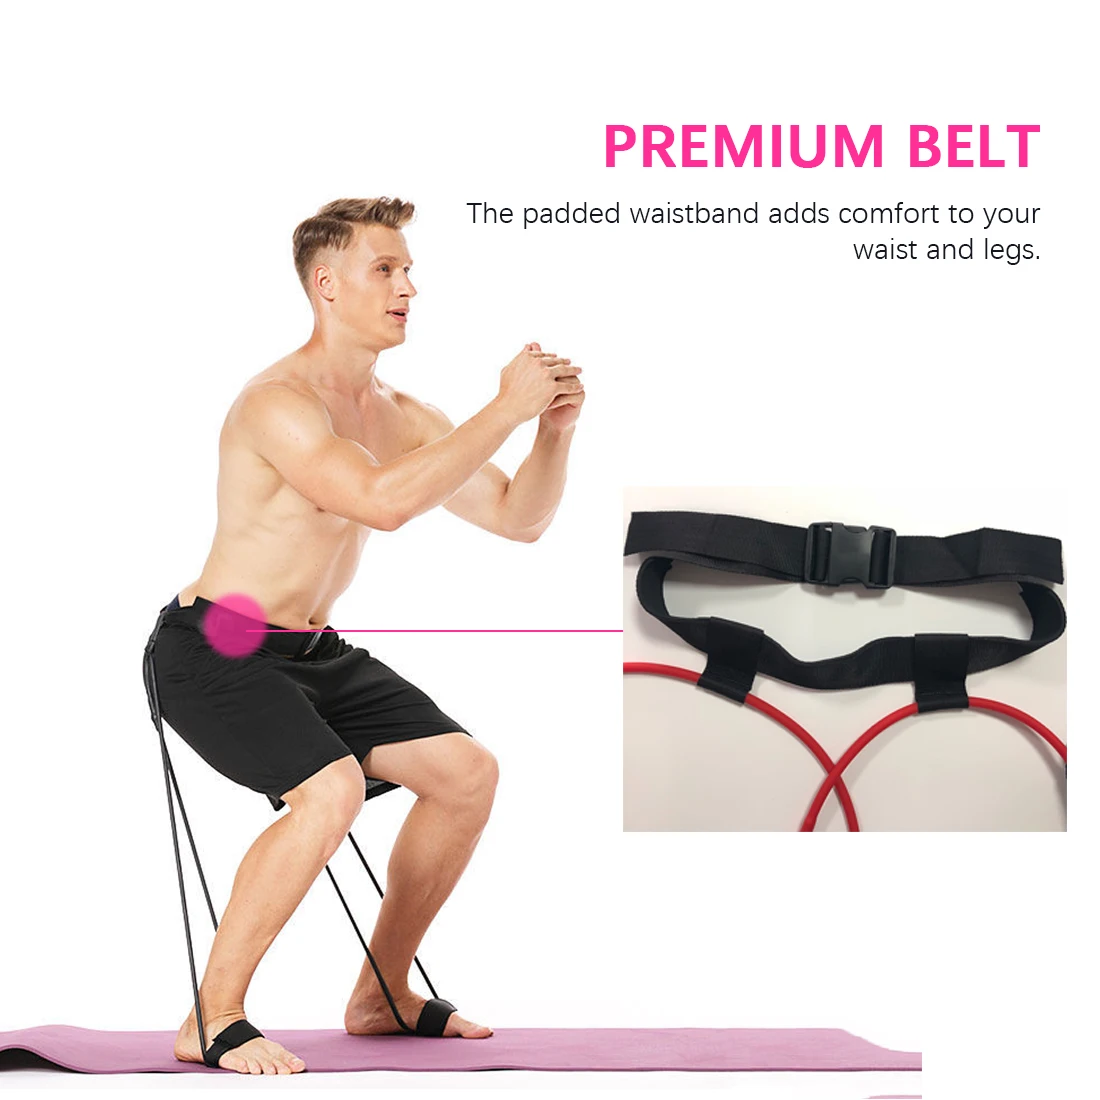 

35lb Fitness Booty Butt Training Band Pedal Exerciser Resistance Bands Adjustable Waist Belt for Glutes Legs Muscle Workout